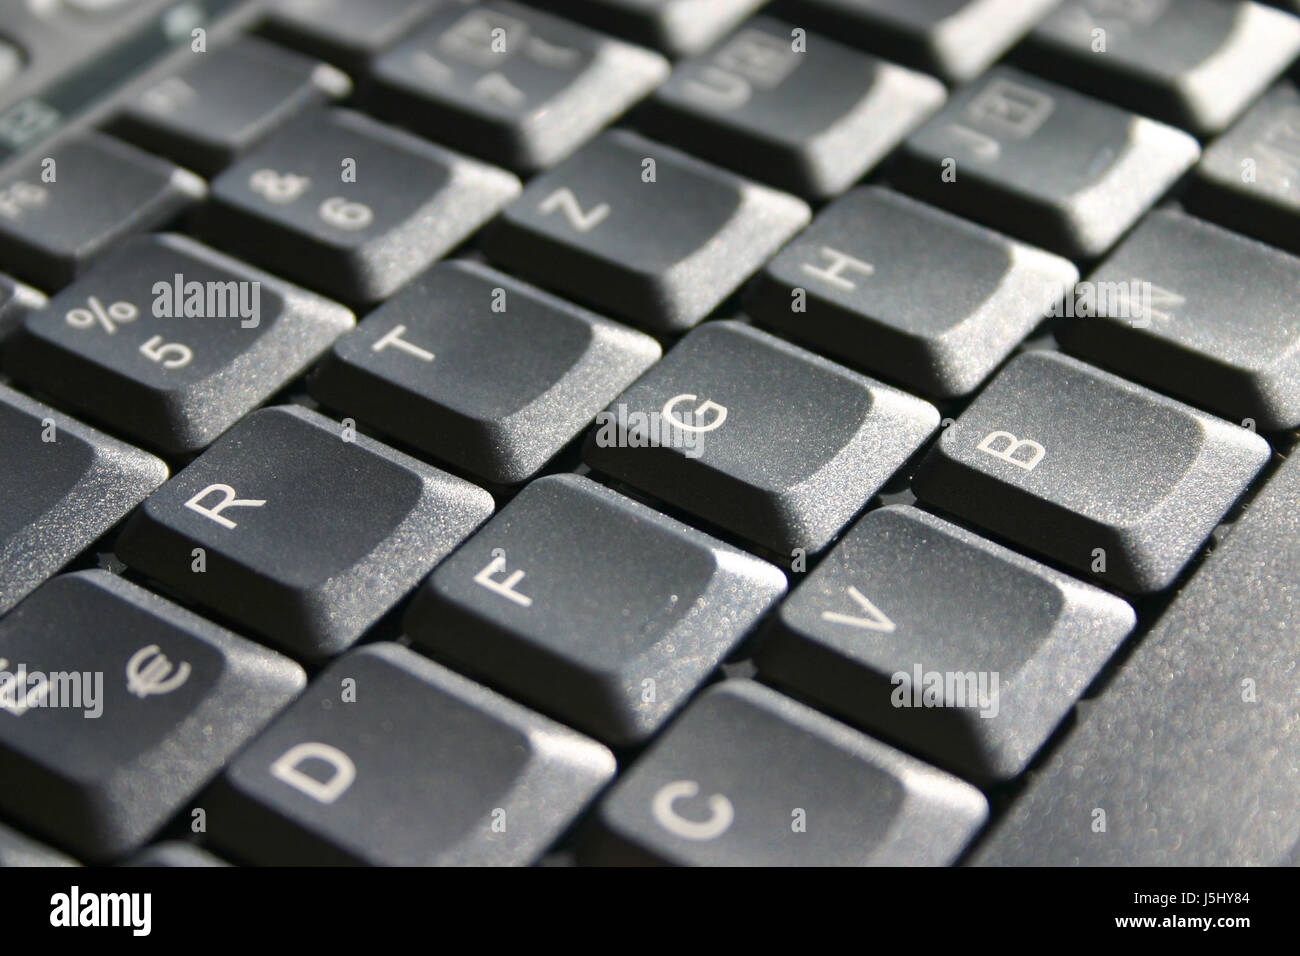 keyboard,letters,writing,font,typography,email,letter,imprint,contact,typo Stock Photo